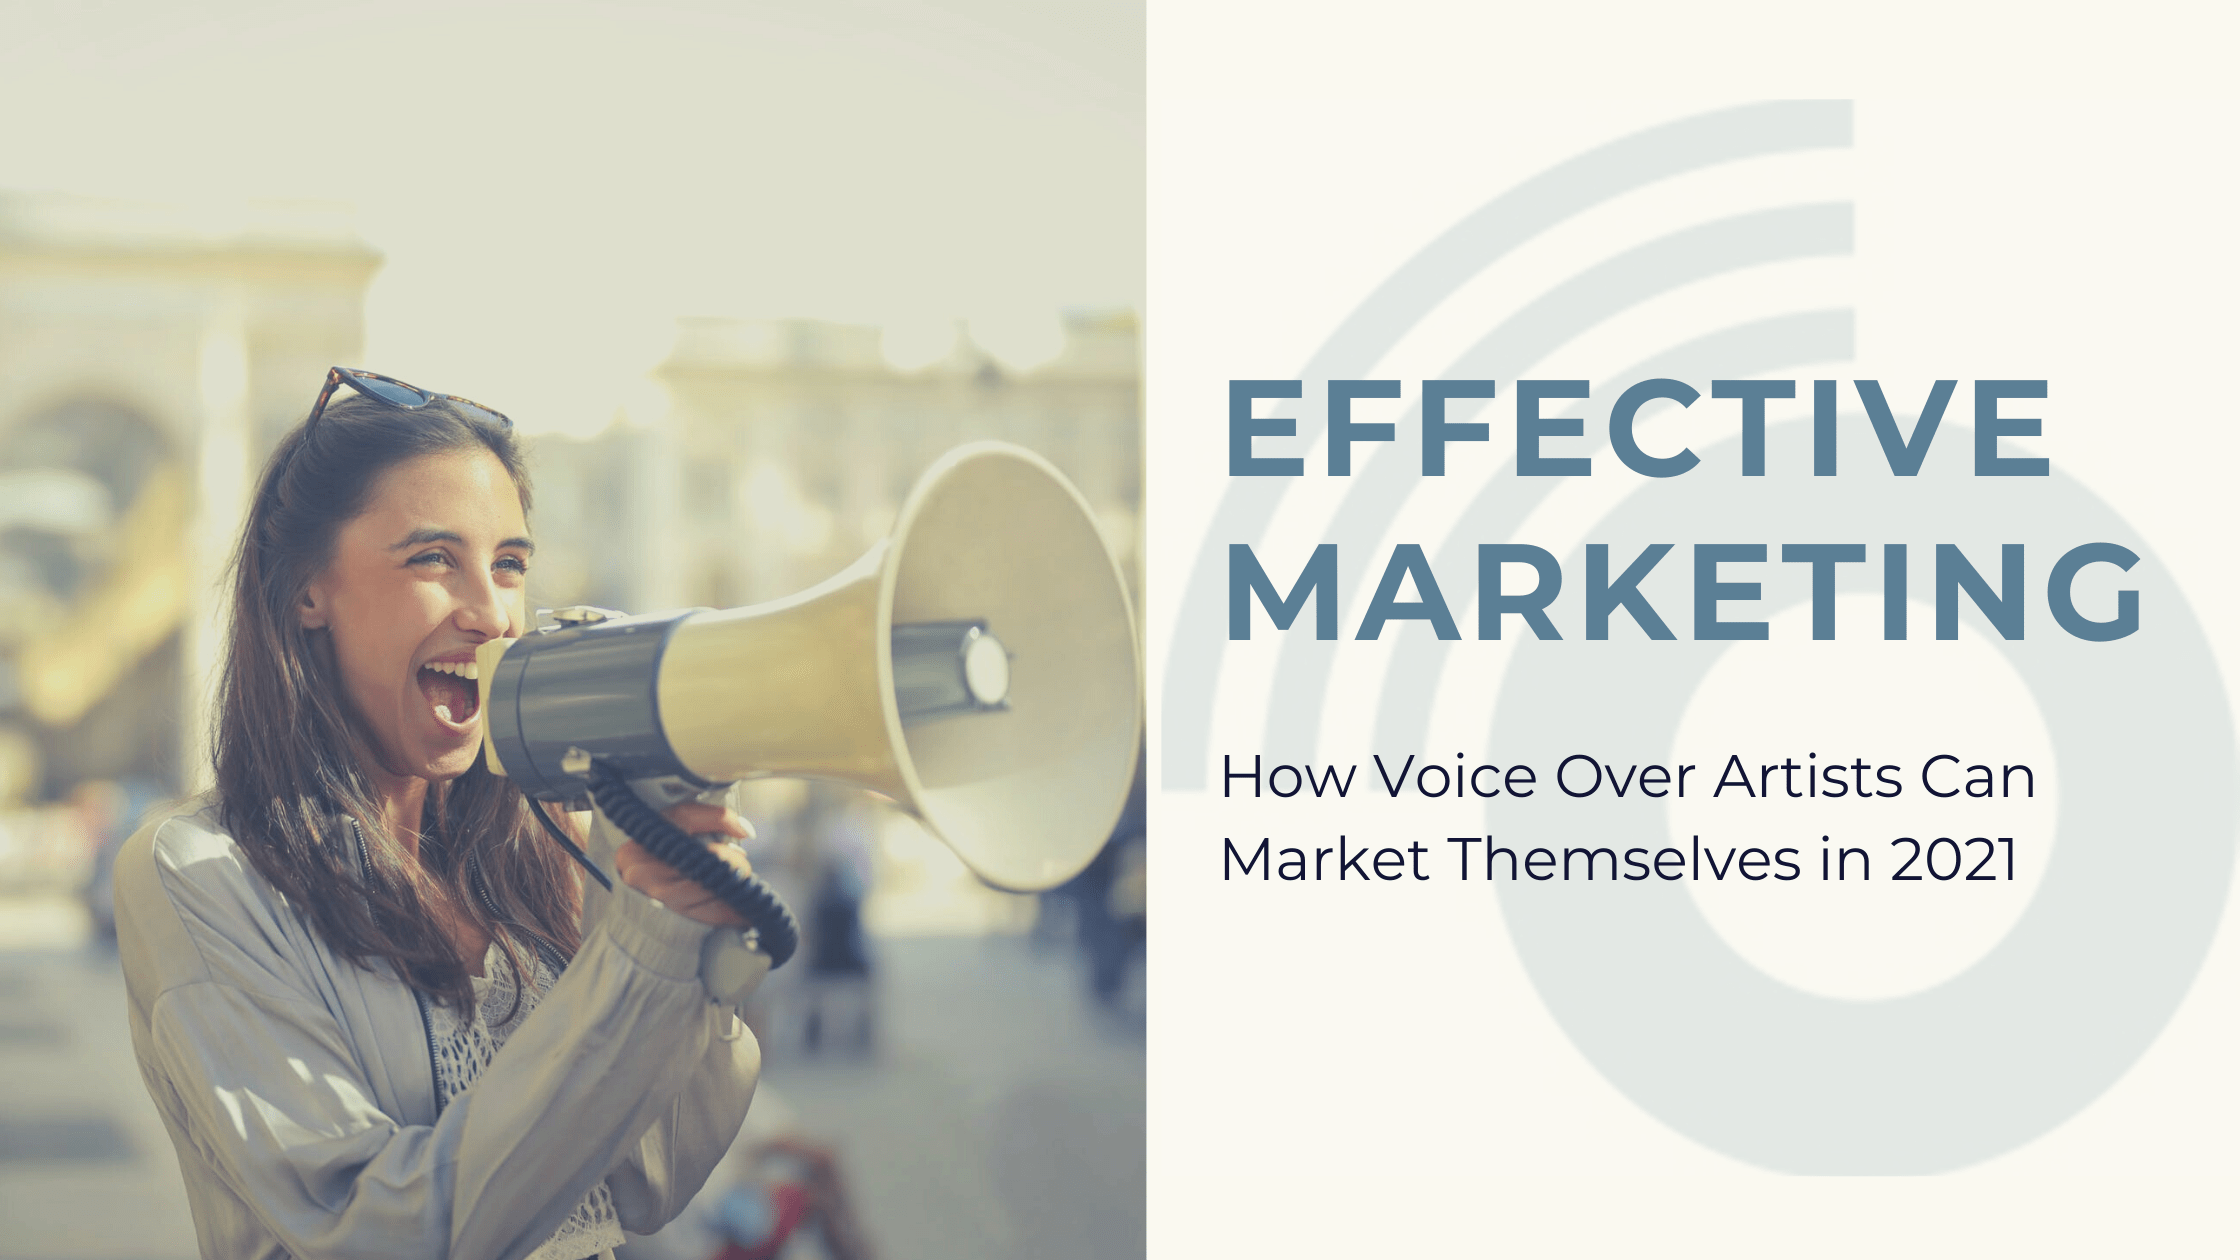 How Voice Over Artists Can Market Themselves in 2021